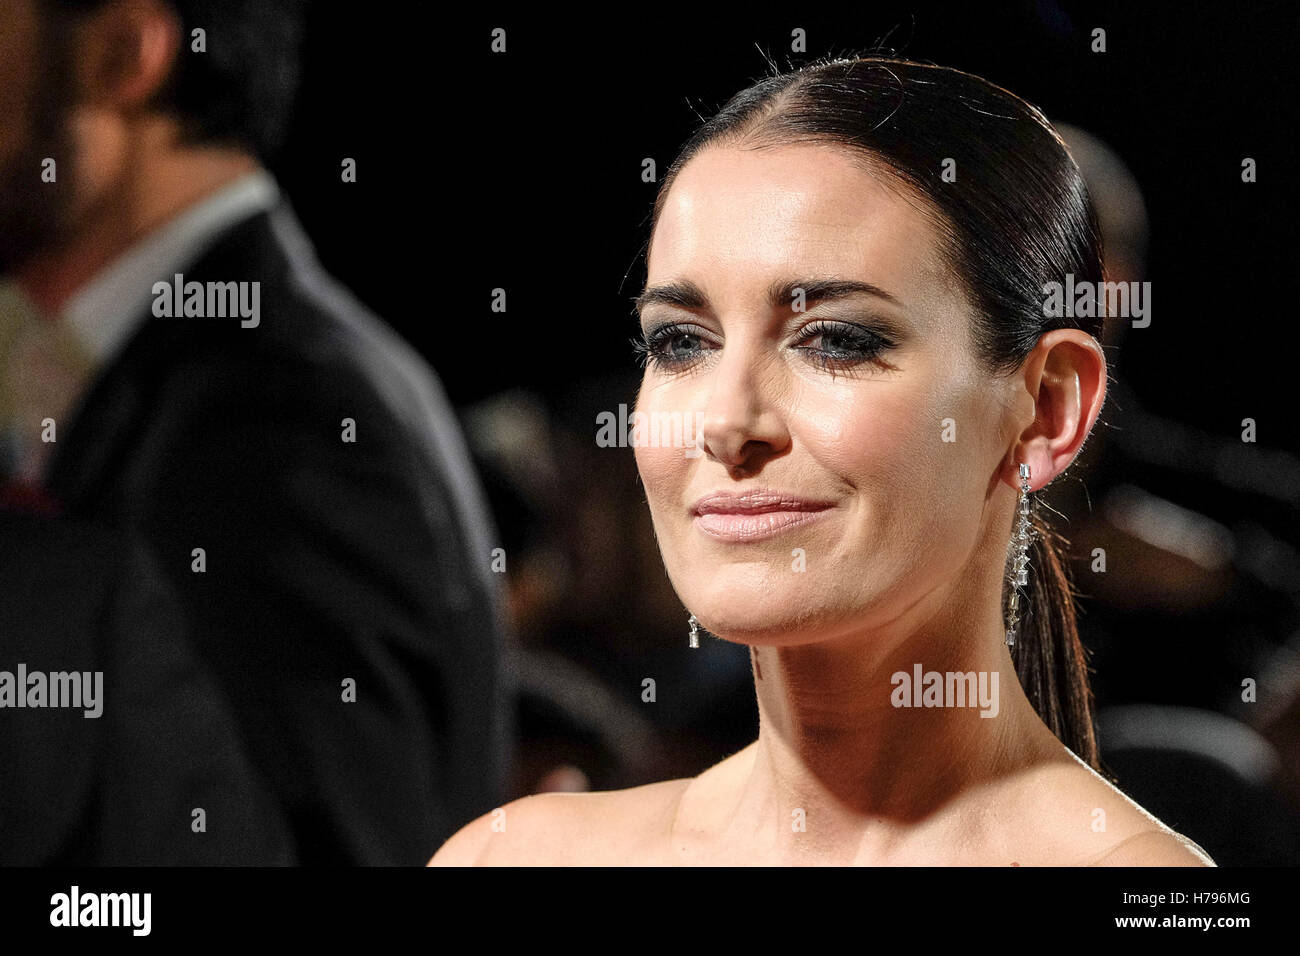 Kirsty Gallacher arrives on the Red Carpet for the Daily Mirror Pride of Britain Awards on 31/10/2016 at The Grosvenor House Hotel, London. Pictured: Kirsty Gallacher. Picture by Julie Edwards. Stock Photo